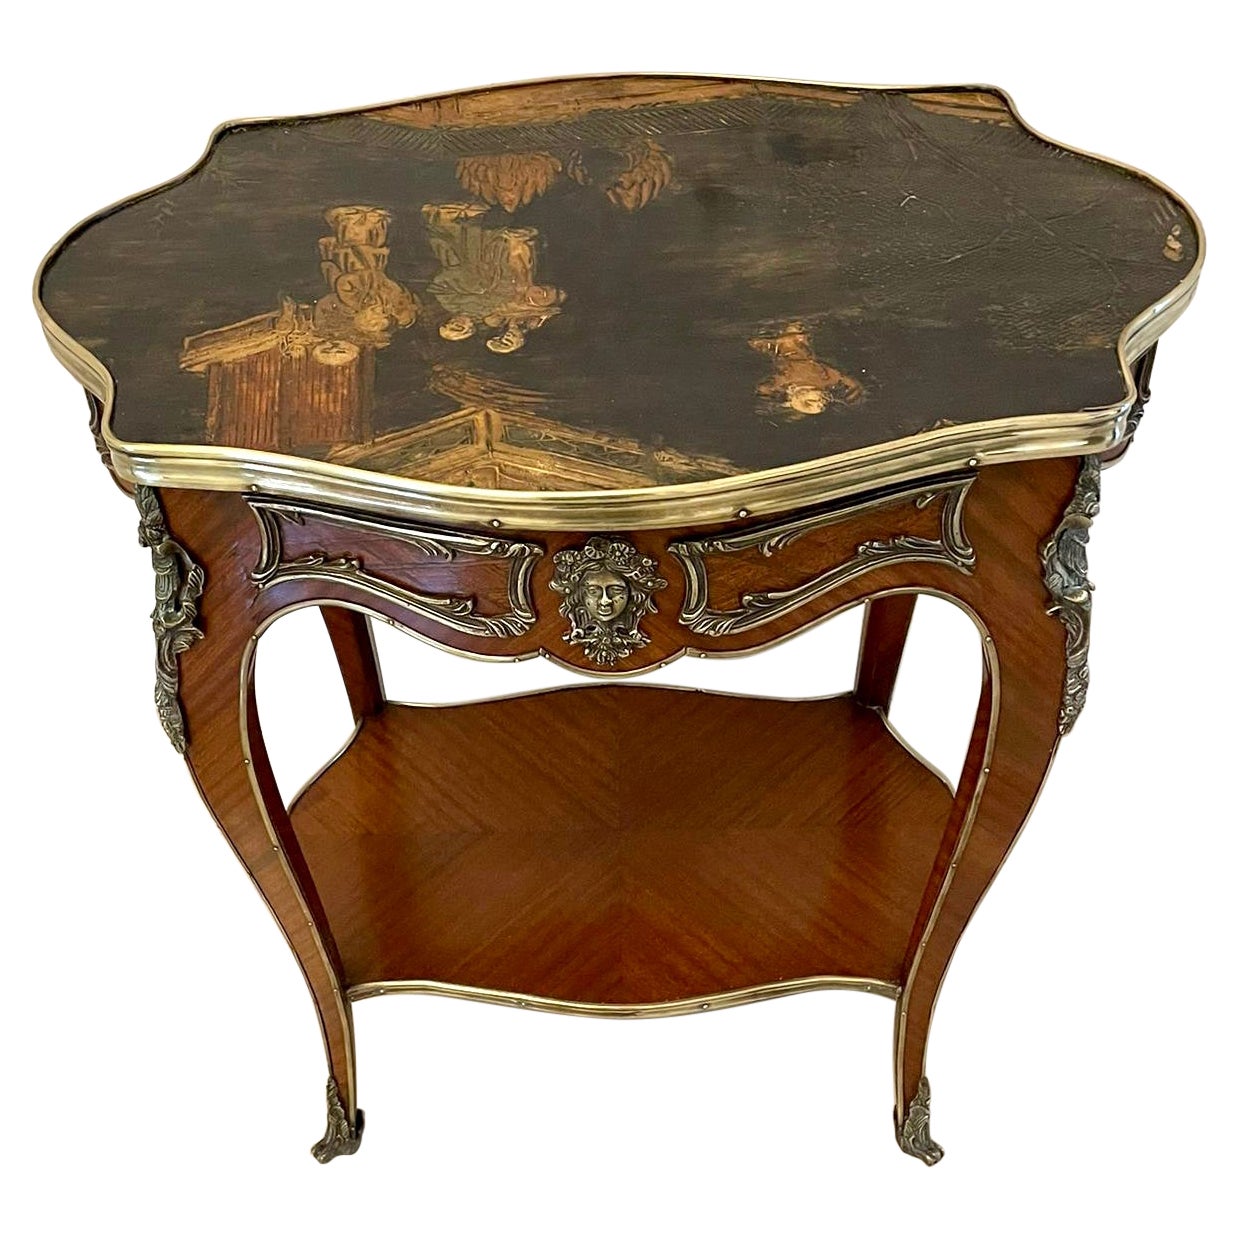 Outstanding quality antique Victorian french kingwood and ormolu mounted freestanding centre table 
having a quality unusual chinoiserie shaped top with a brass edge. The centre table boasts a stunning ormolu mounted frieze drawer and stands on